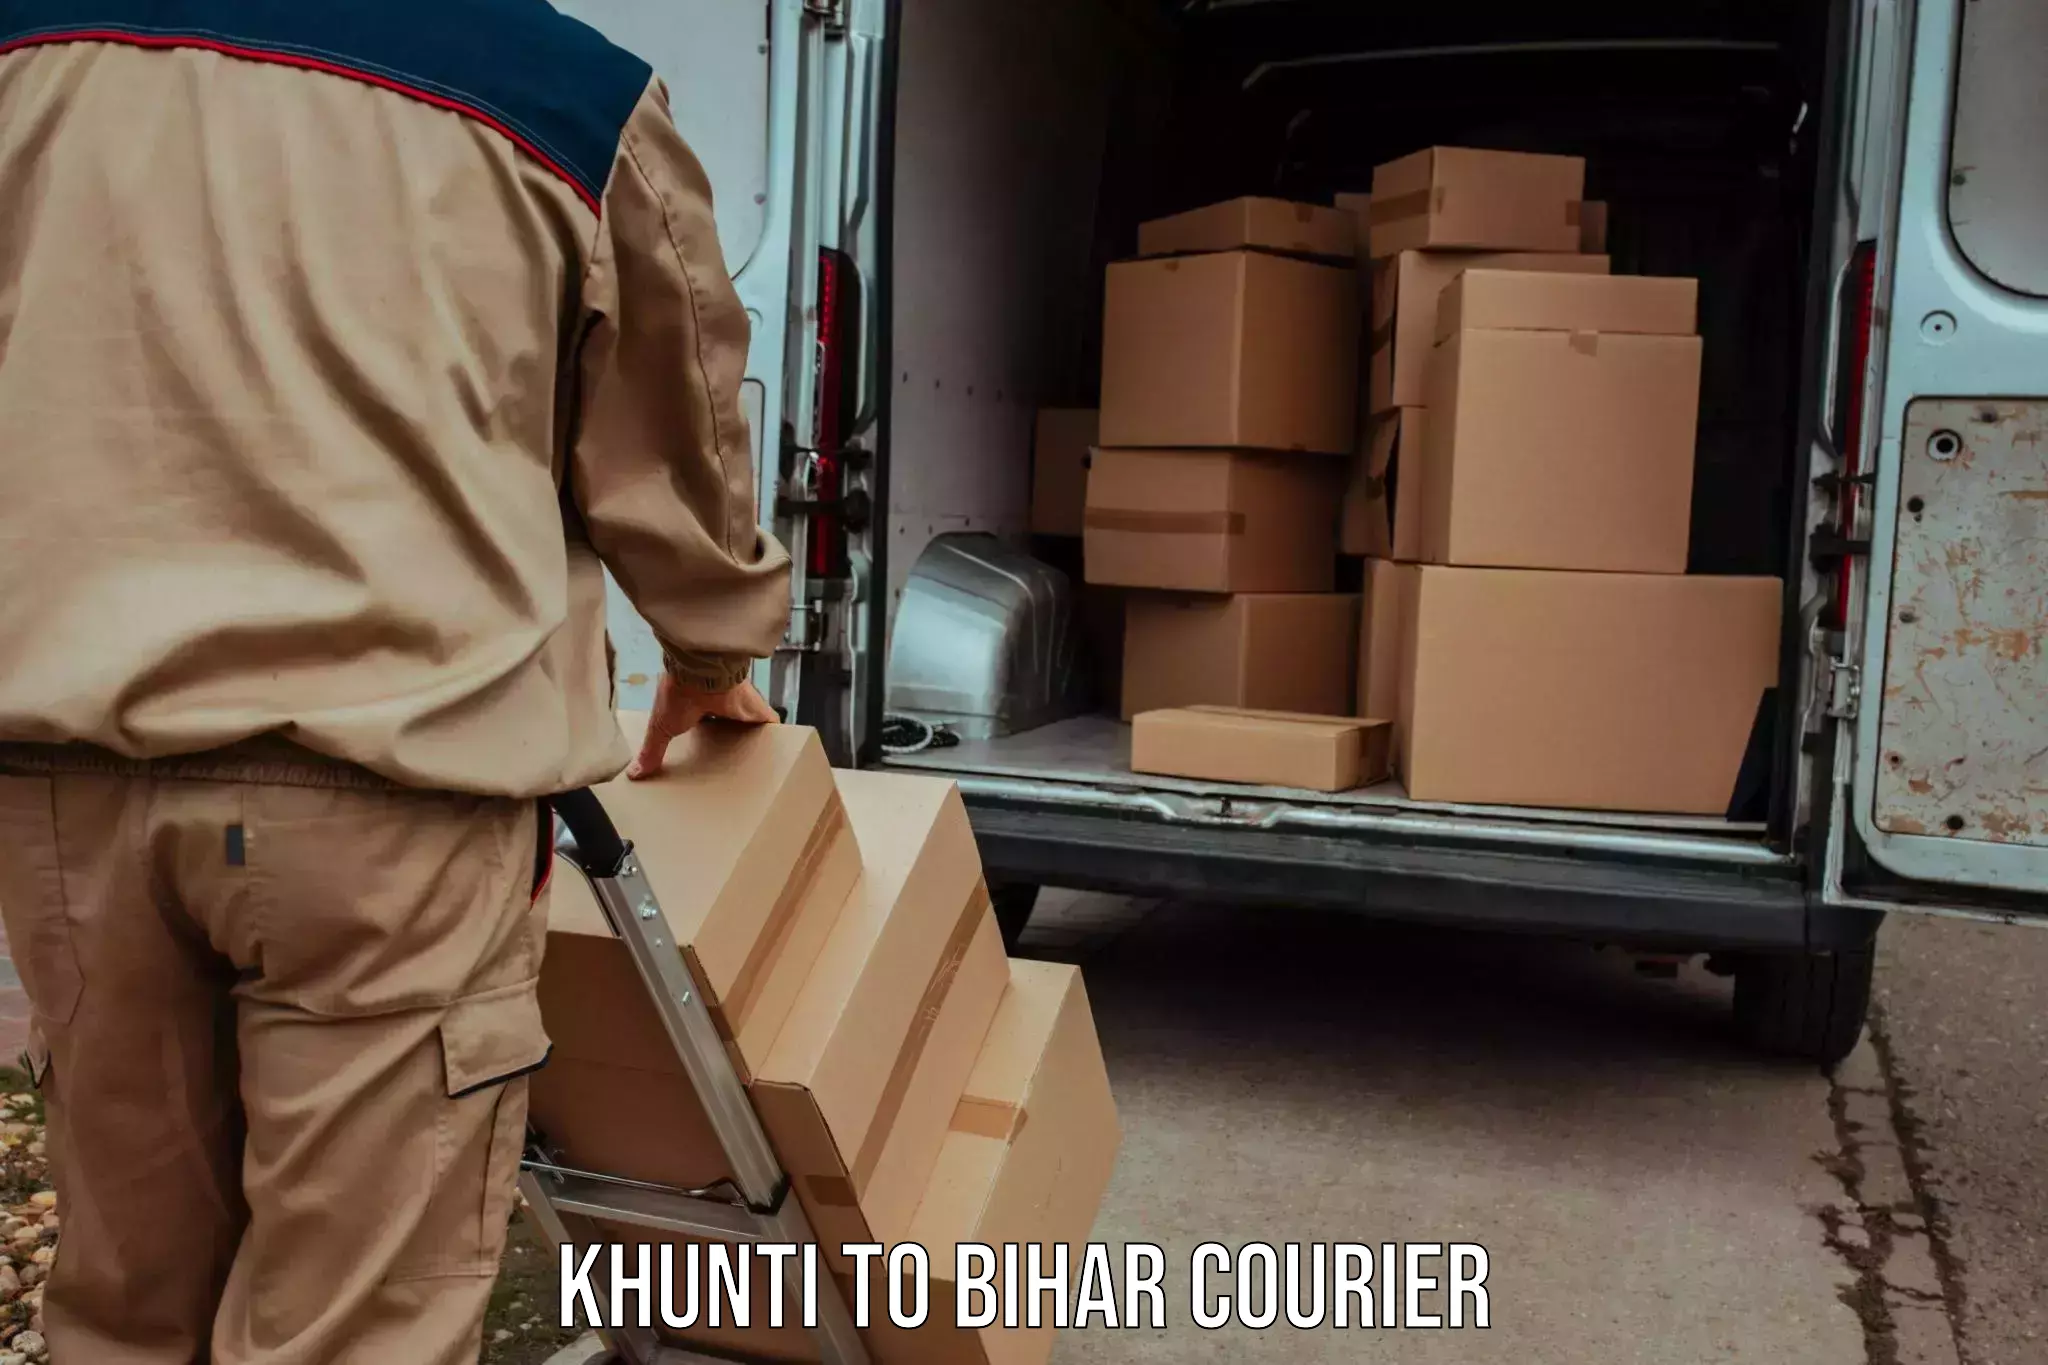 24/7 courier service in Khunti to Mohammadpur